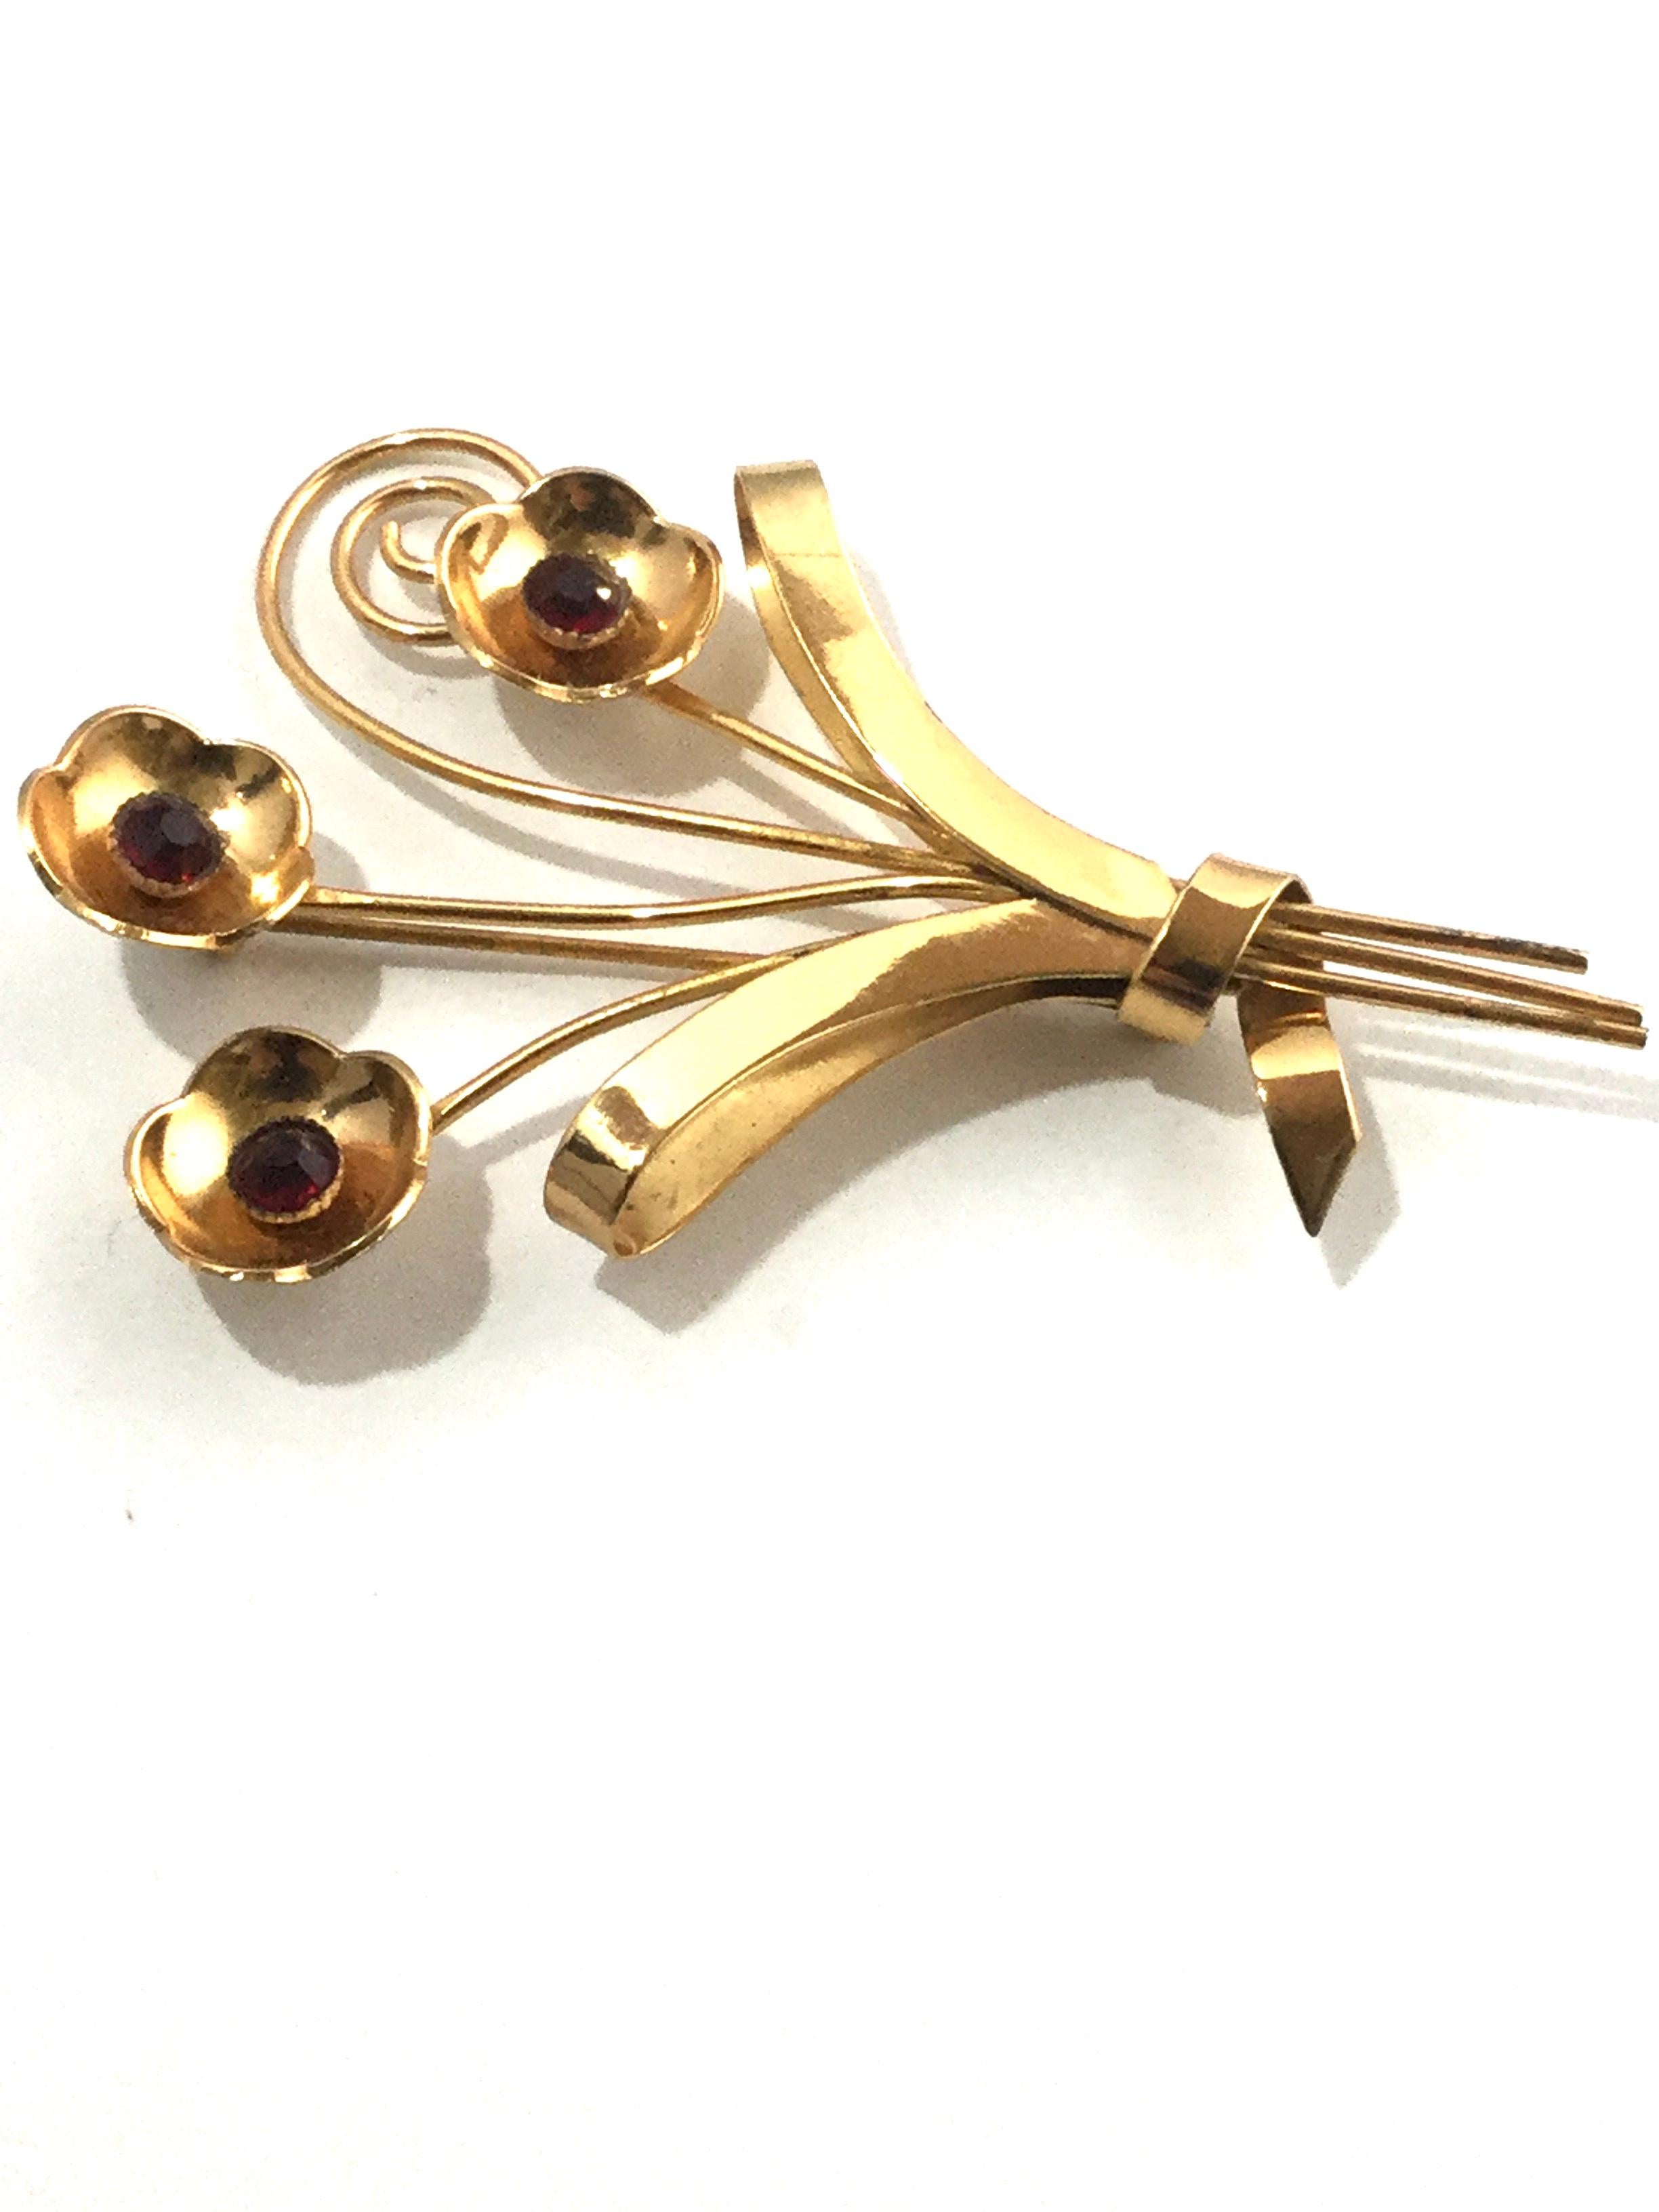 Coro Sterling Silver Gold-Plated Flower Brooch Pin For Sale 1